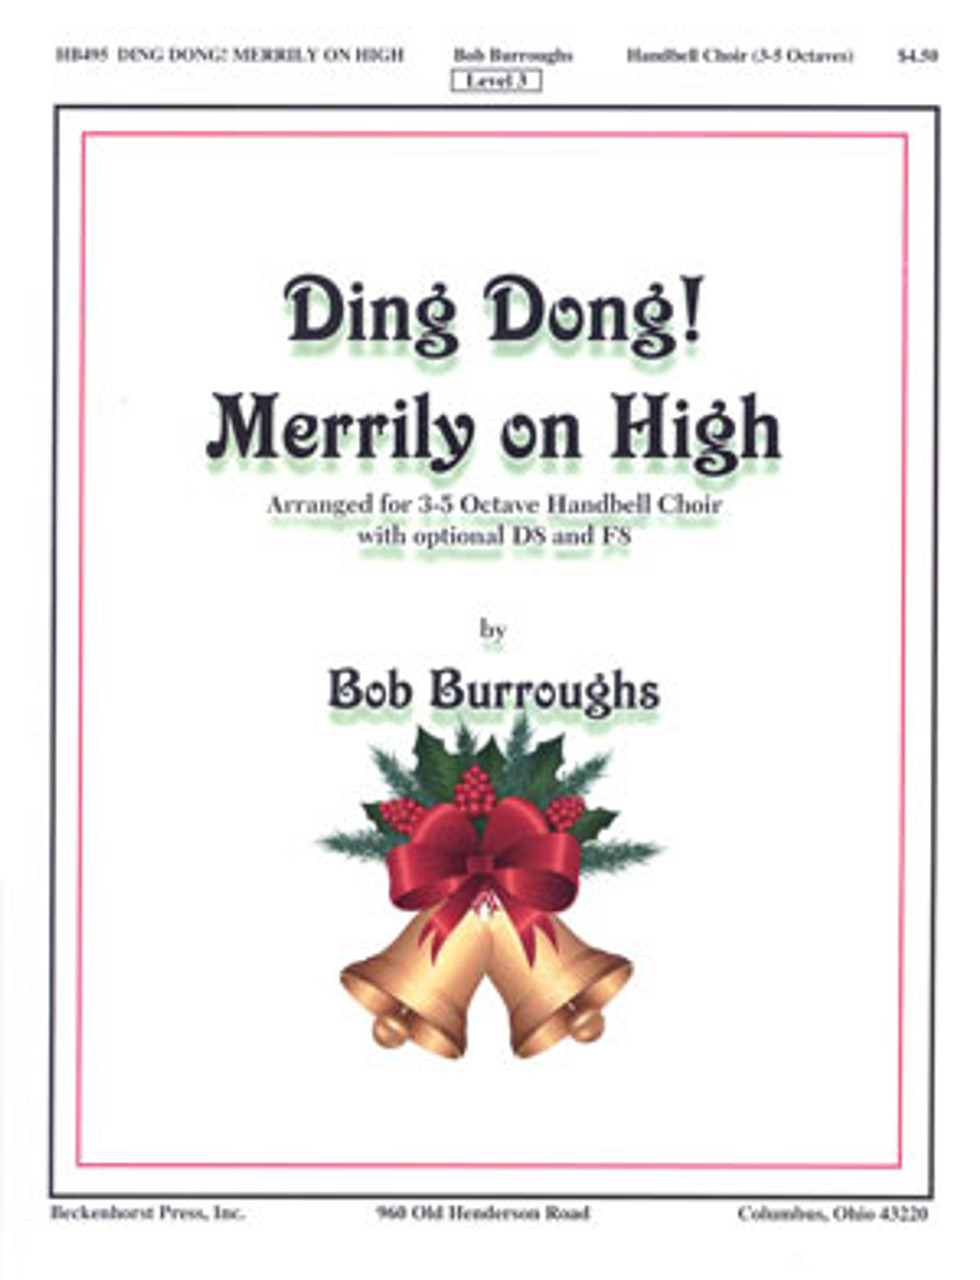 Ding Dong Merrily on a High: the Lyrics and the Meaning